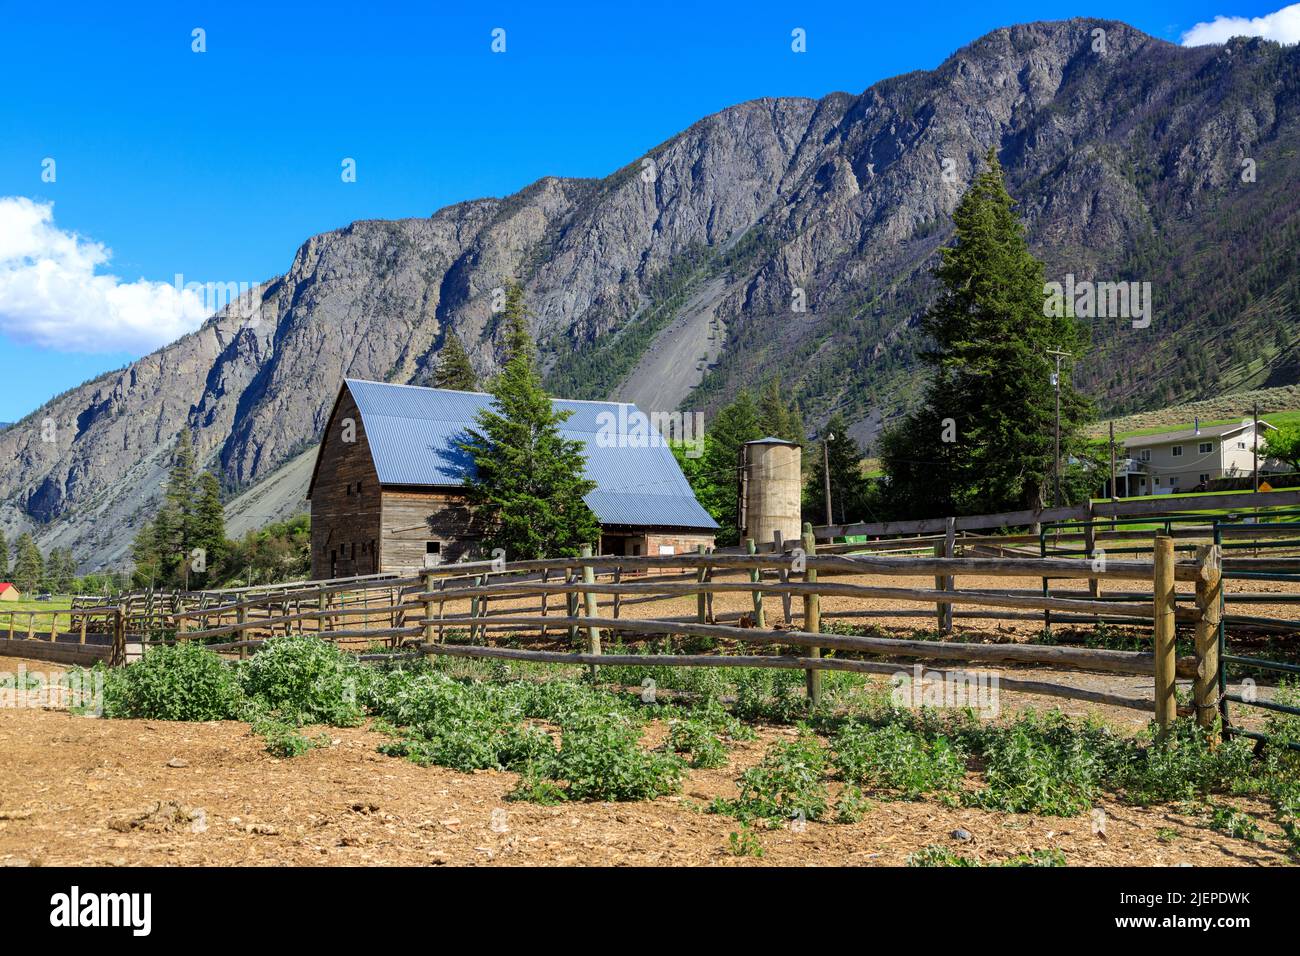 Canadian landscape of an old rustic wood barn in the Similkameen Valley near Keremeos, British Columbia, Canada. Stock Photo